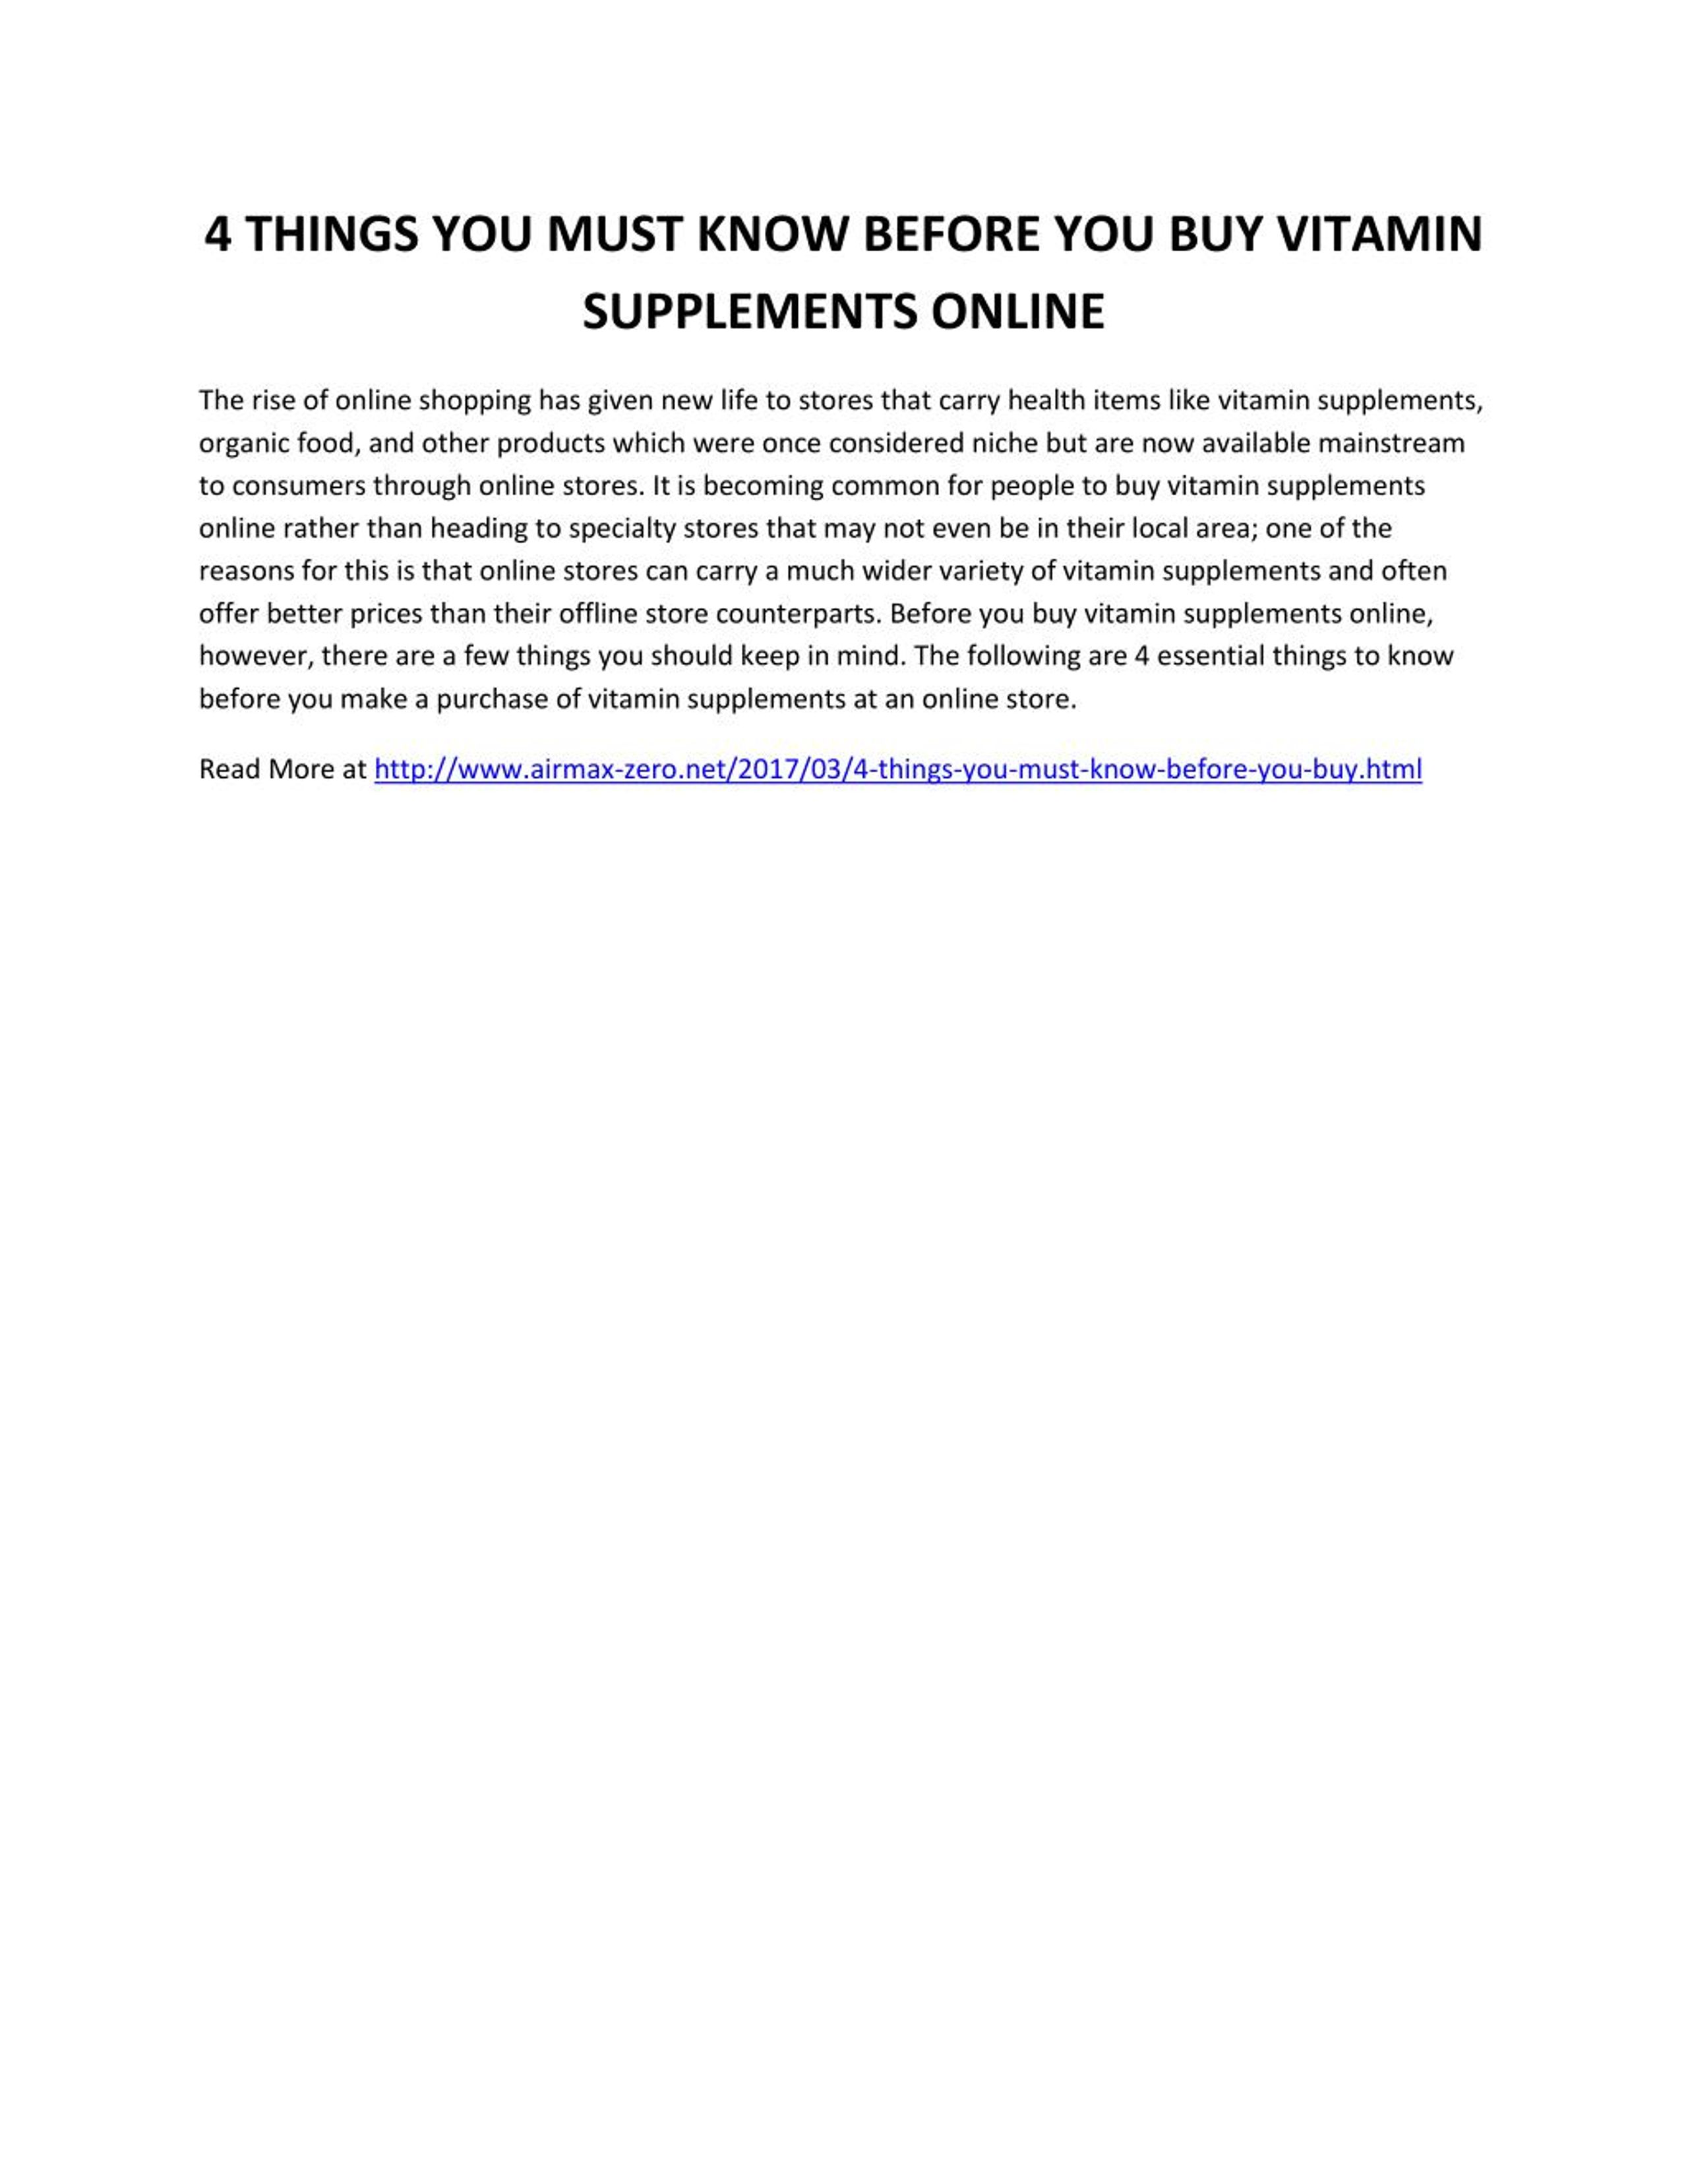 Ppt 4 Things You Must Know Before You Buy Vitamin Supplements Online